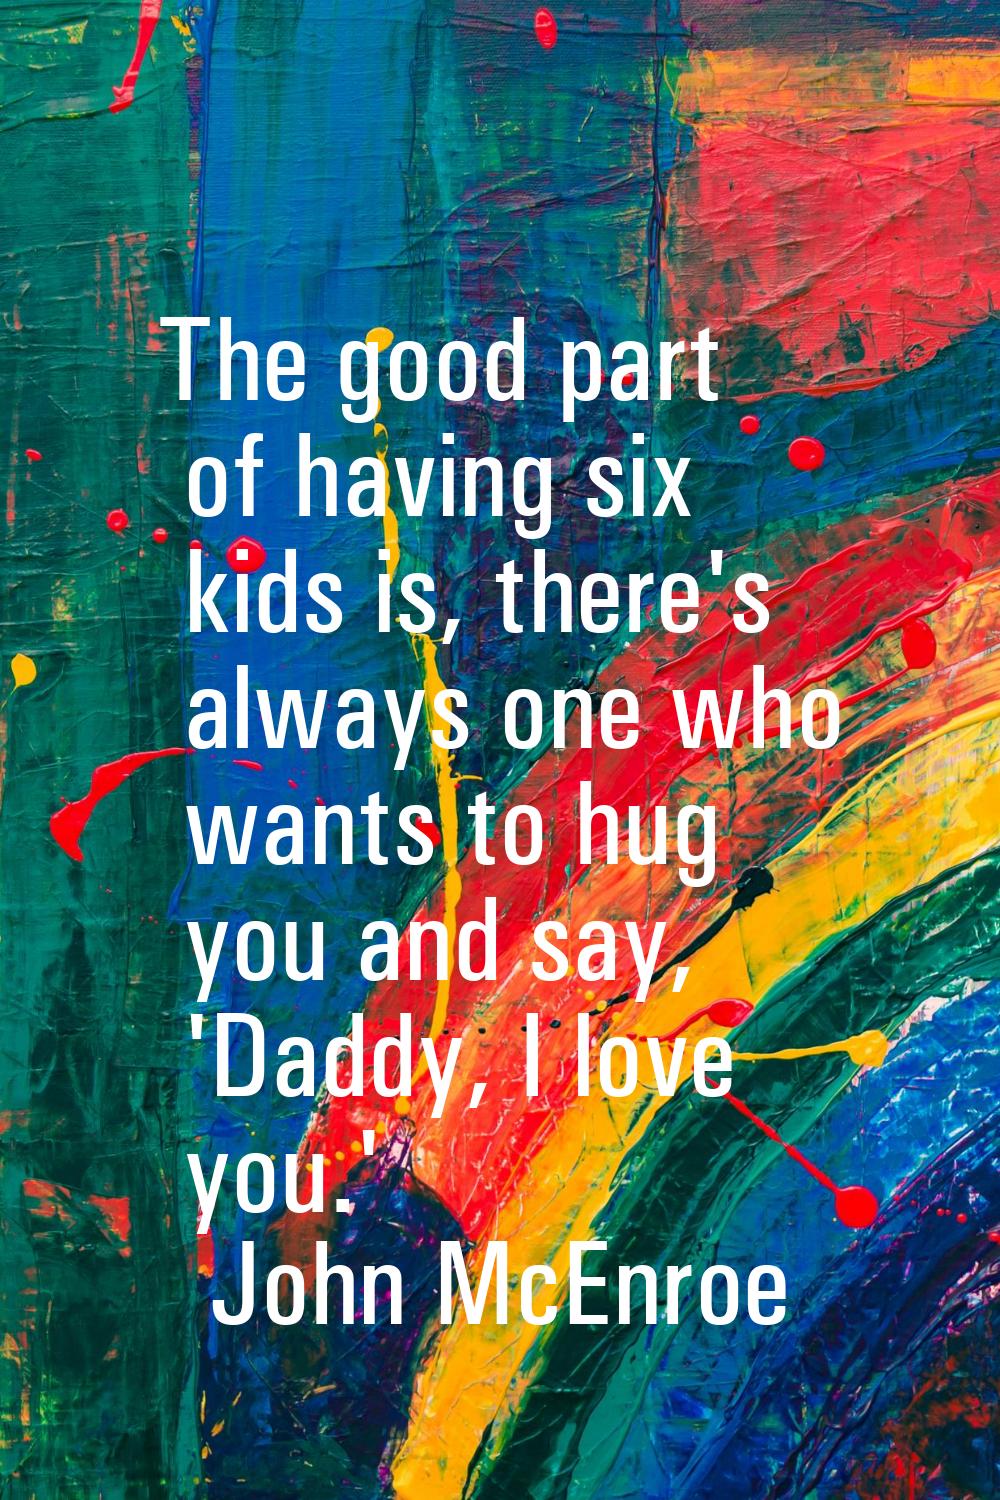 The good part of having six kids is, there's always one who wants to hug you and say, 'Daddy, I lov